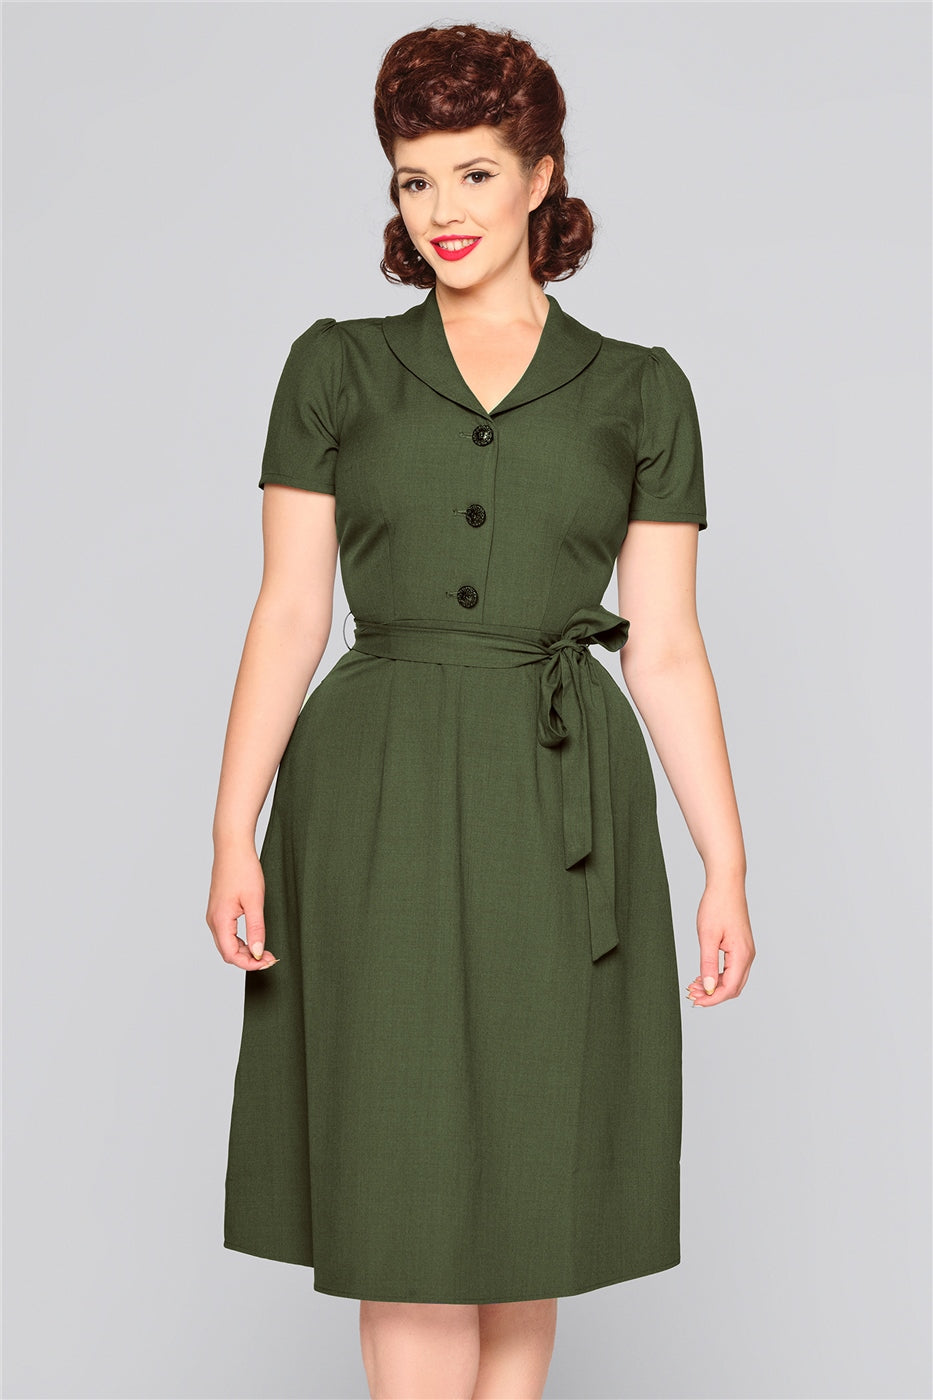 Pretty vintage lady standing with her arms by her sides smiling, wearing a classic 40s style dress with button front  and short sleeves.